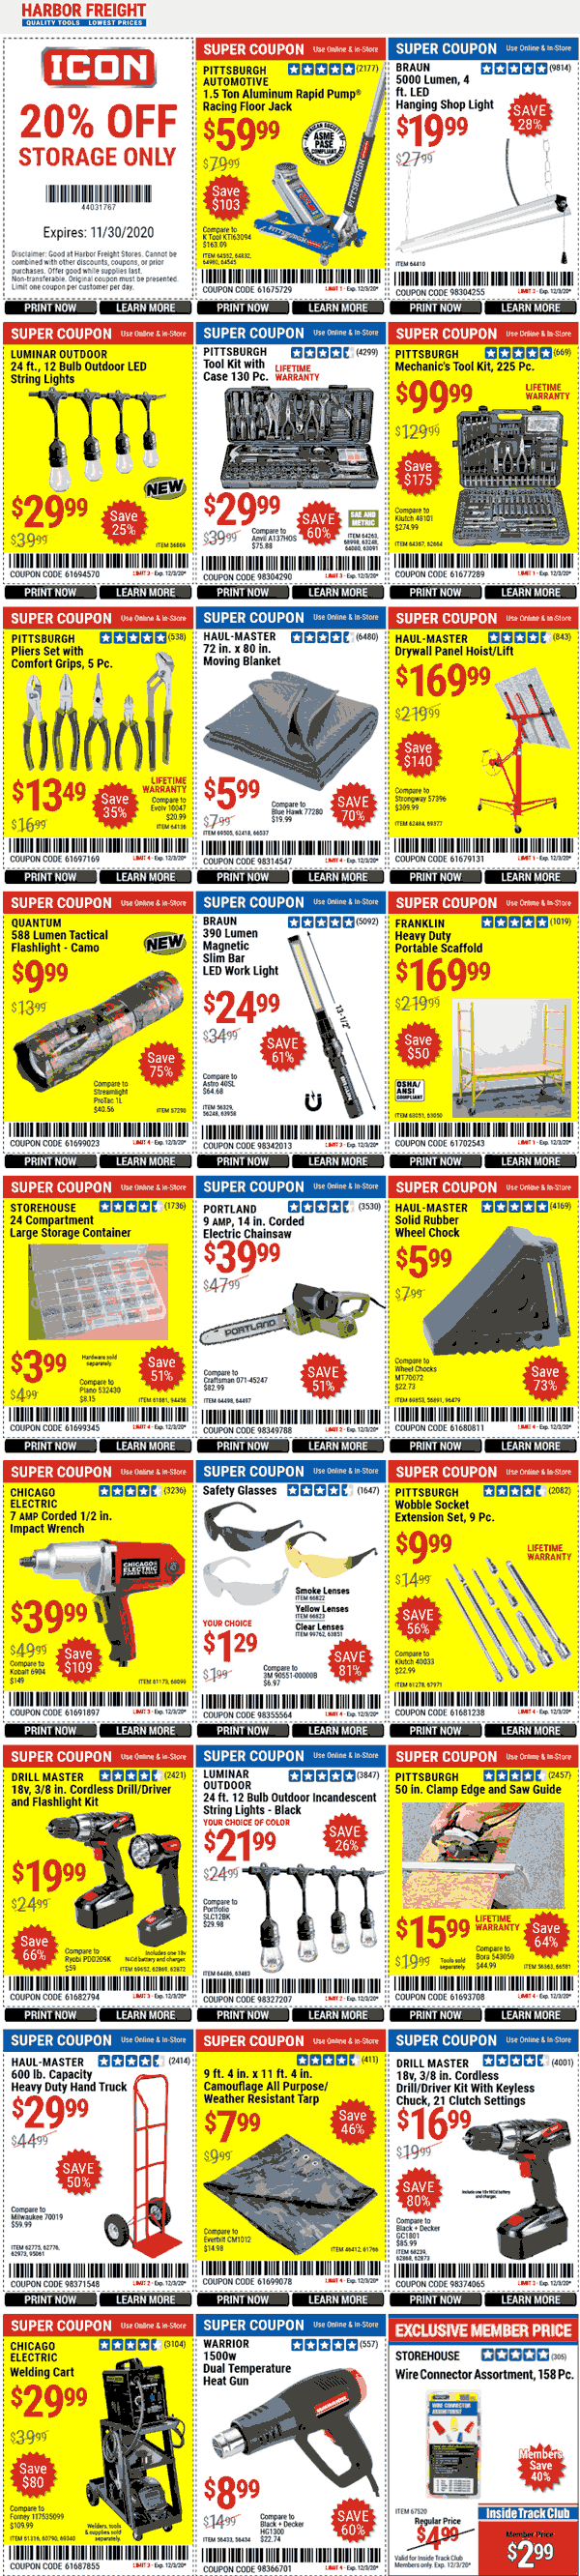 Harbor Freight stores Coupon  Various coupons for Harbor Freight Tools #harborfreight 